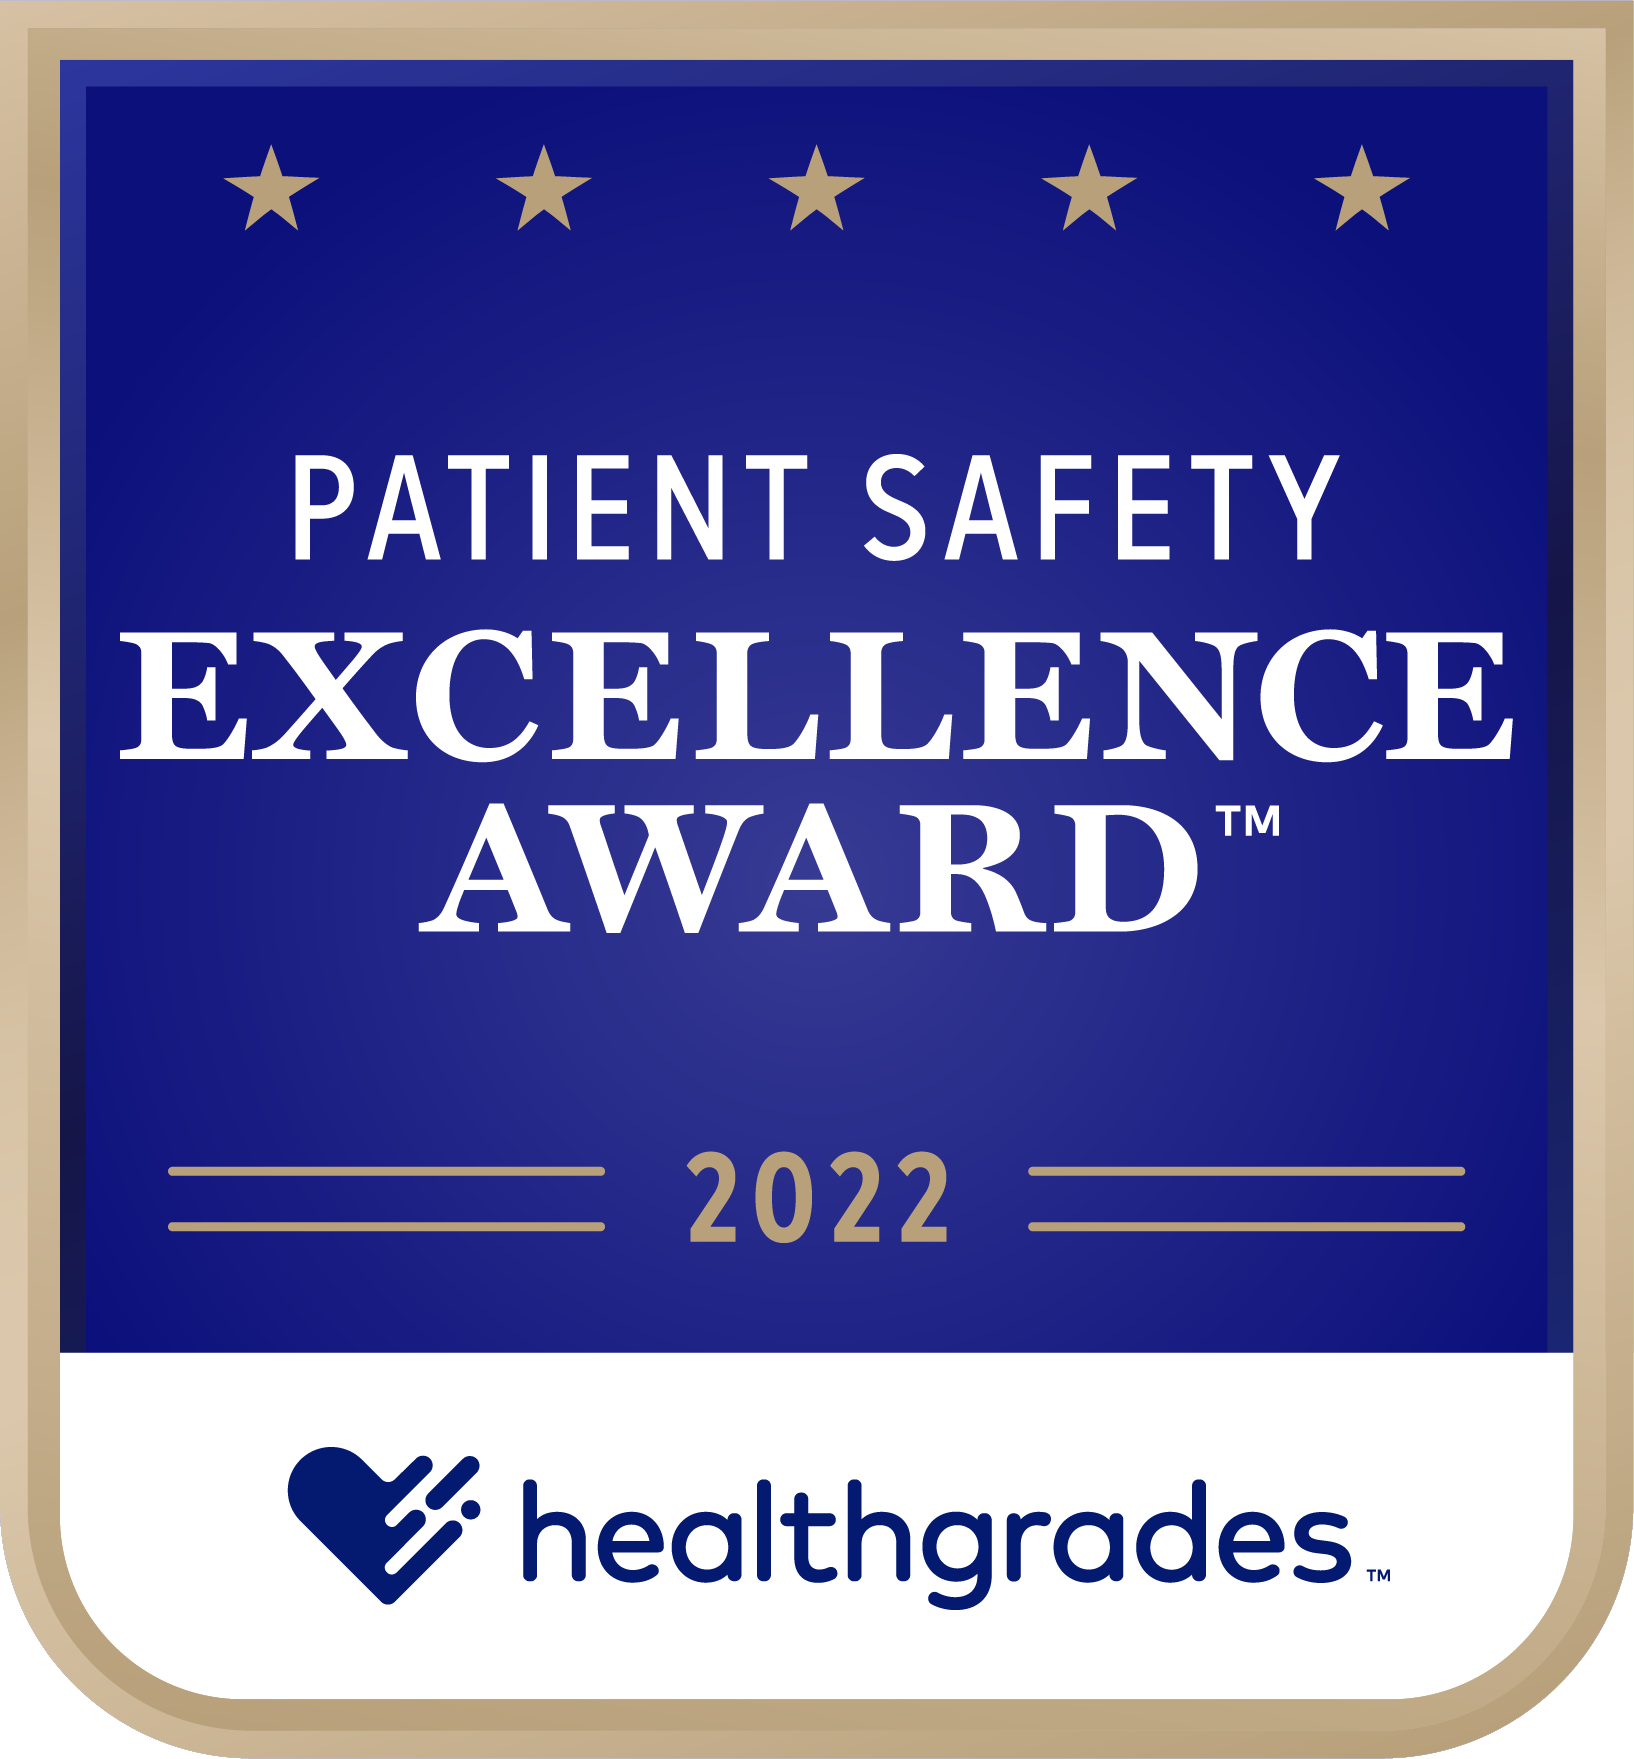 HG_Patient_Safety_Award_Image_2022